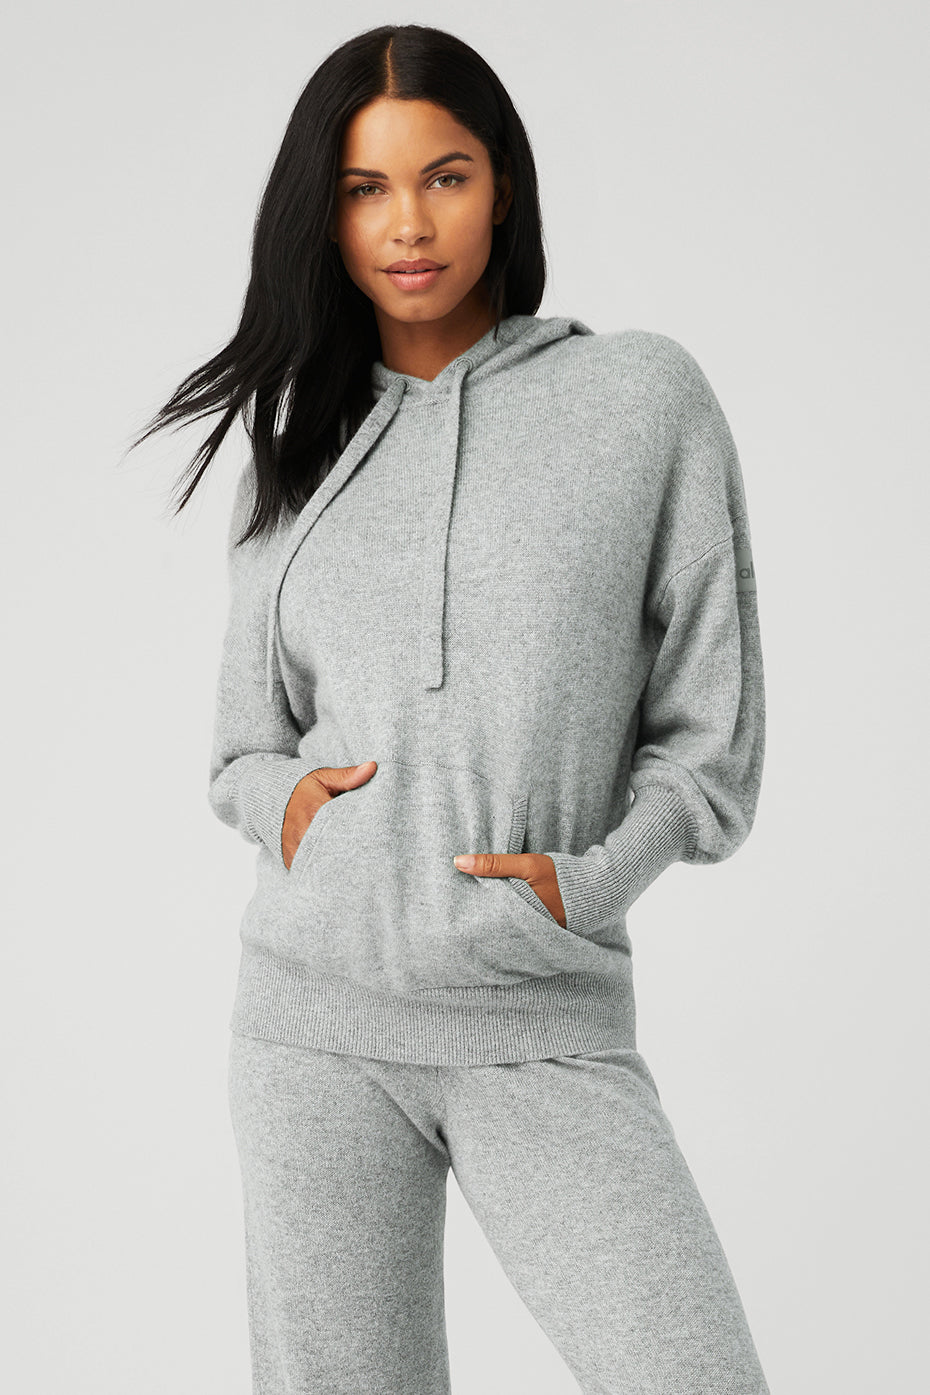 6 Cashmere Sweatpants Sets to Upgrade Your Loungewear Game